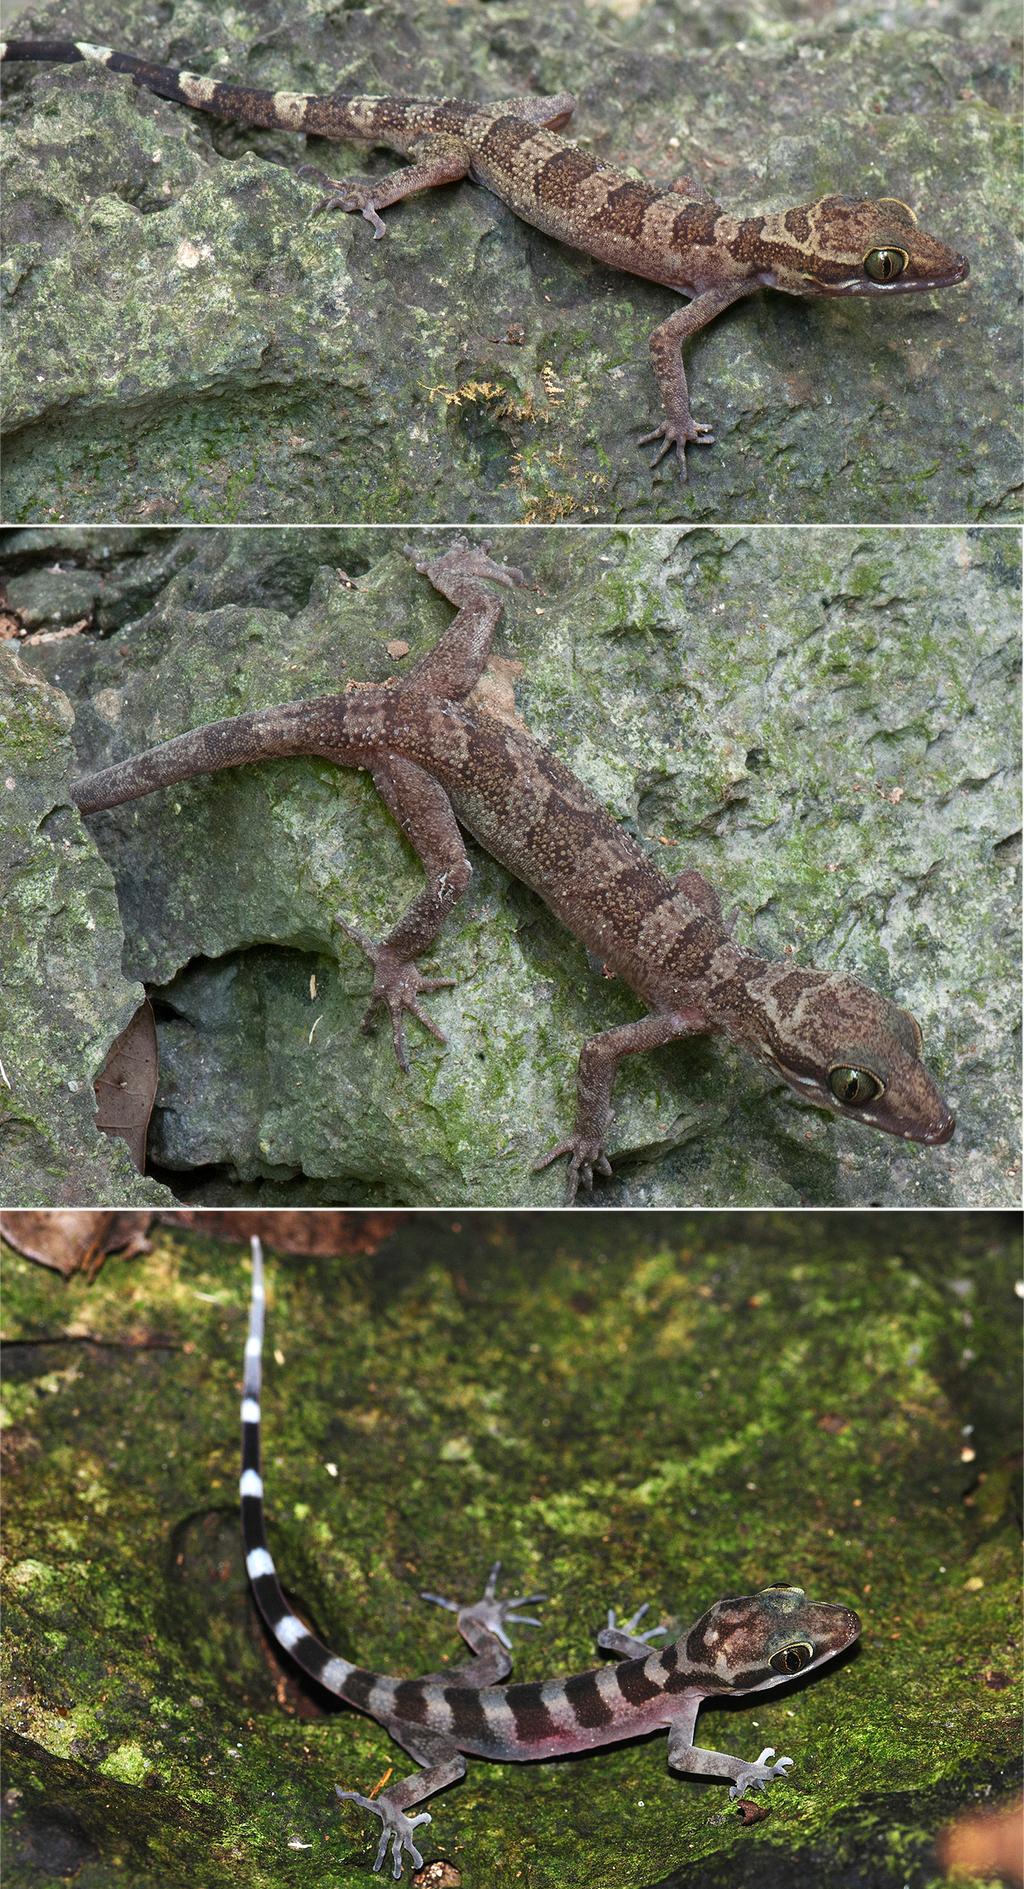 FIGURE 3. Upper: adult male holotype of Cyrtodactylus guakanthanensis sp. nov. (LSUHC 11322) from Gua Kanthan, Perak, Peninsular Malaysia. Middle: adult male paratype of C.